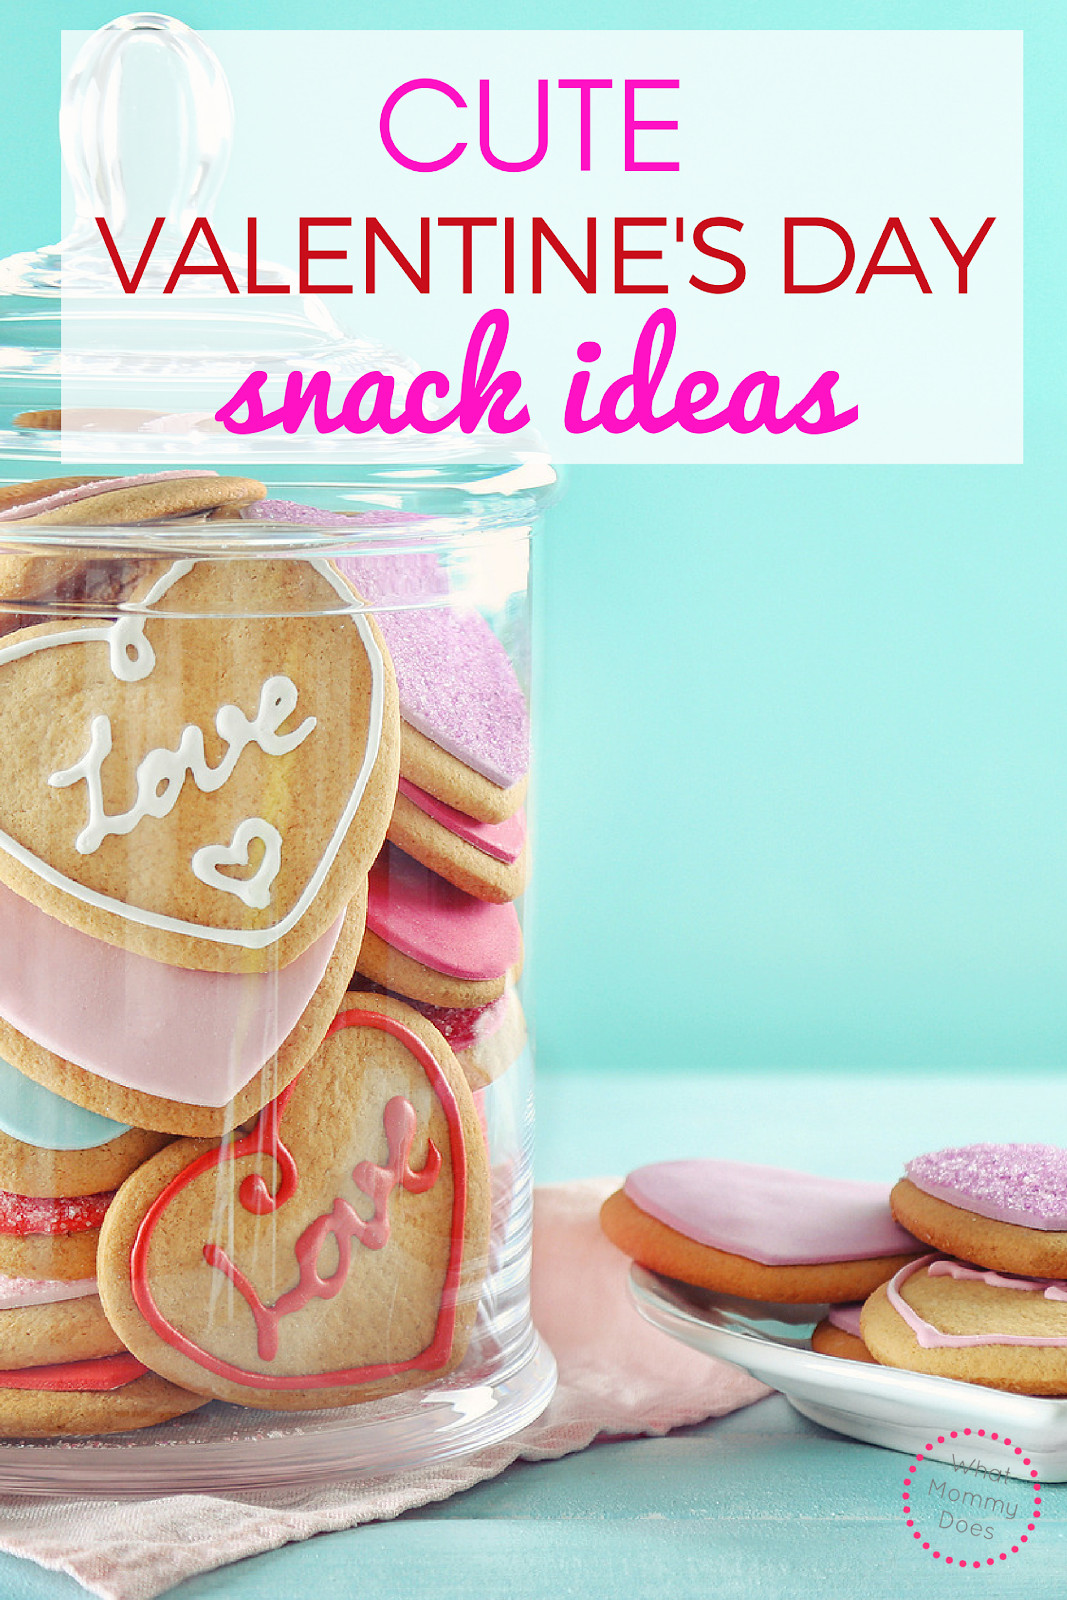 Great Ideas For Valentines Day
 Cute Valentine s Day Snack Ideas